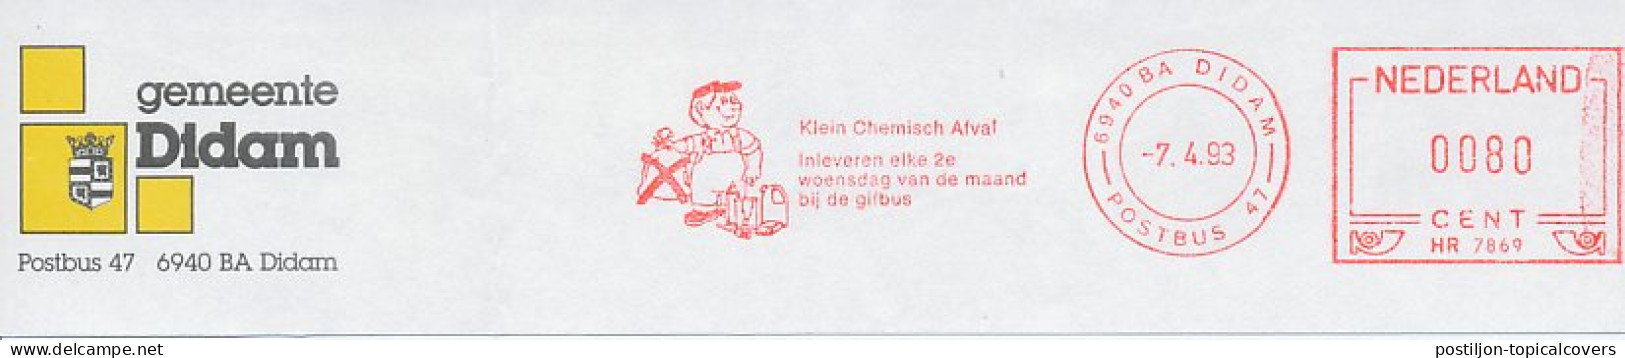 Meter Top Cut Netherlands 1993 Chemical Waste - Hand It In - Protection De L'environnement & Climat